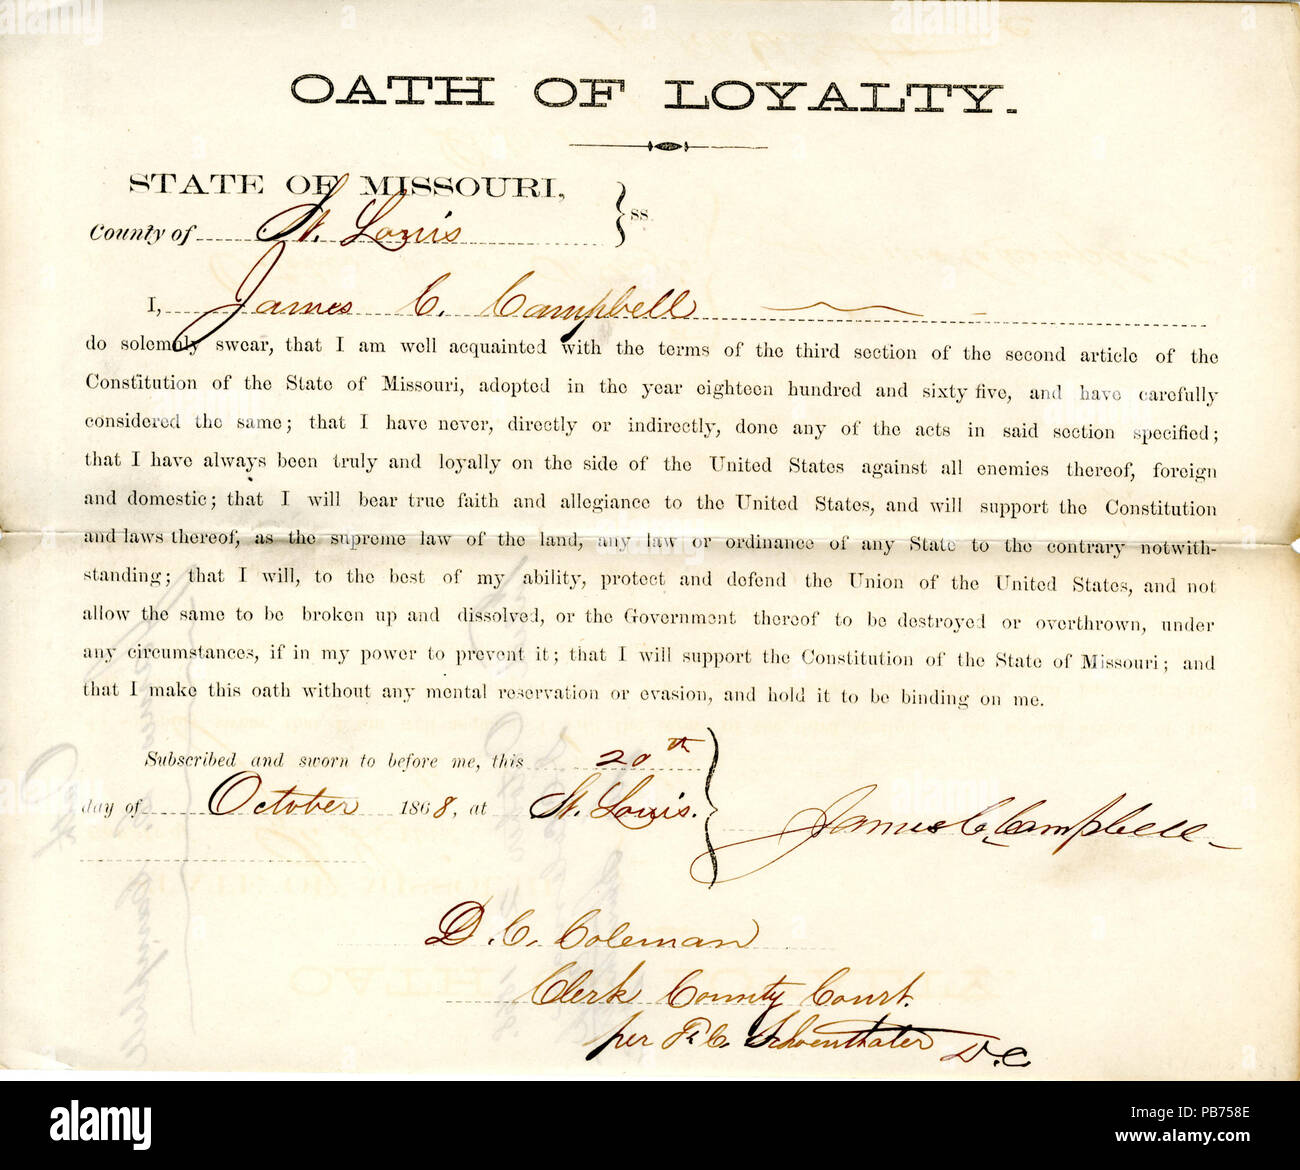 949 Loyalty oath of James C. Campbell of Missouri, County of St. Louis Stock Photo